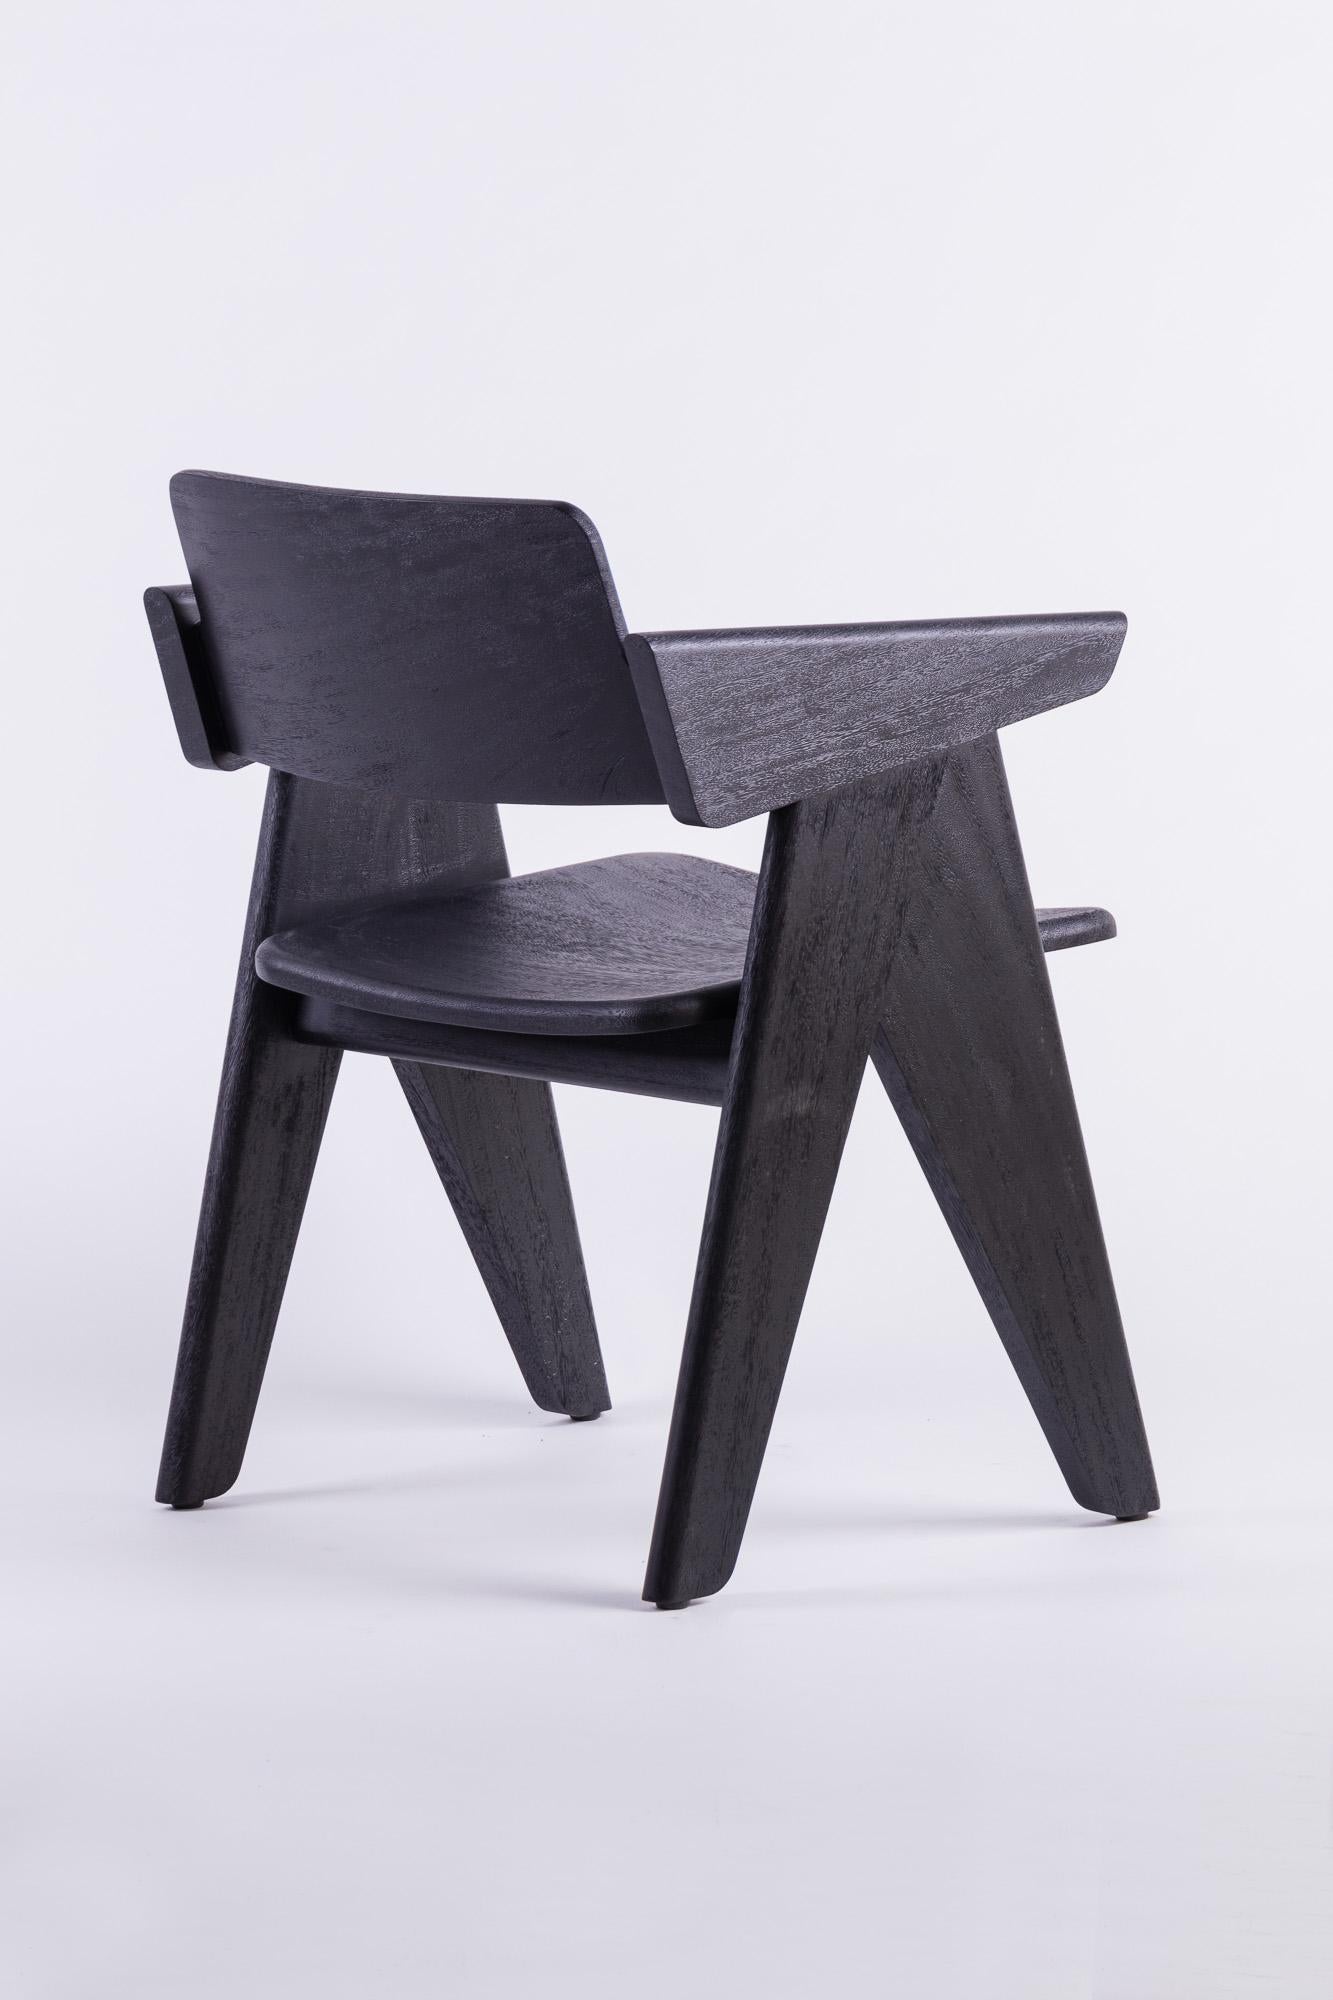 Hand-Crafted KENA Chair, Rough Black Acacia Wood For Sale